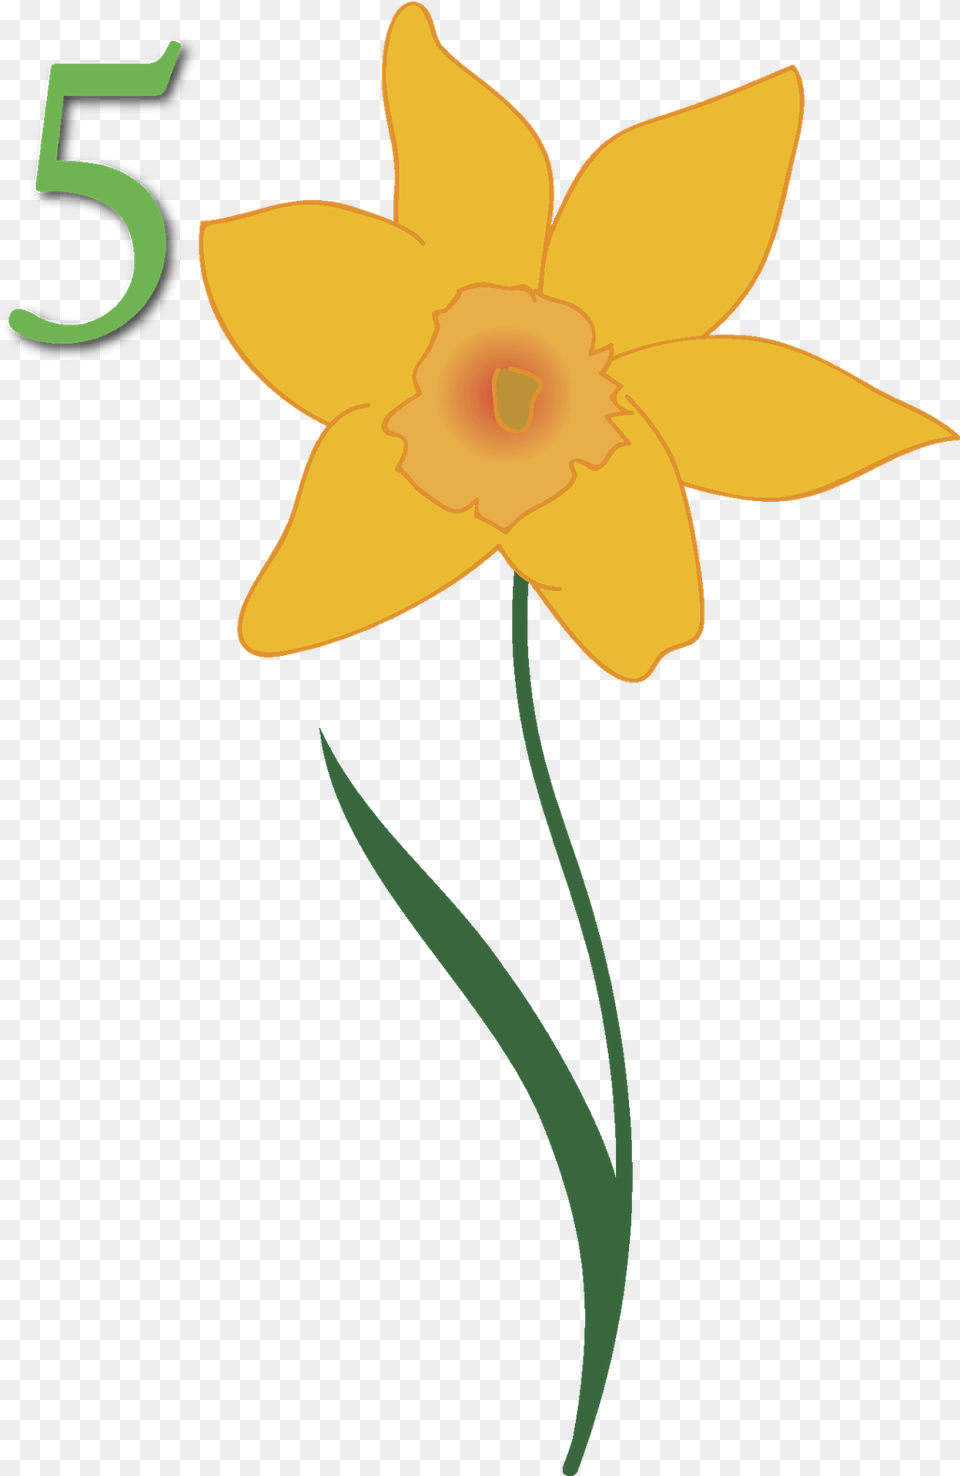 Our Pto Arranged For This Room Sized Map Of North America Narcissus, Daffodil, Flower, Plant Png Image